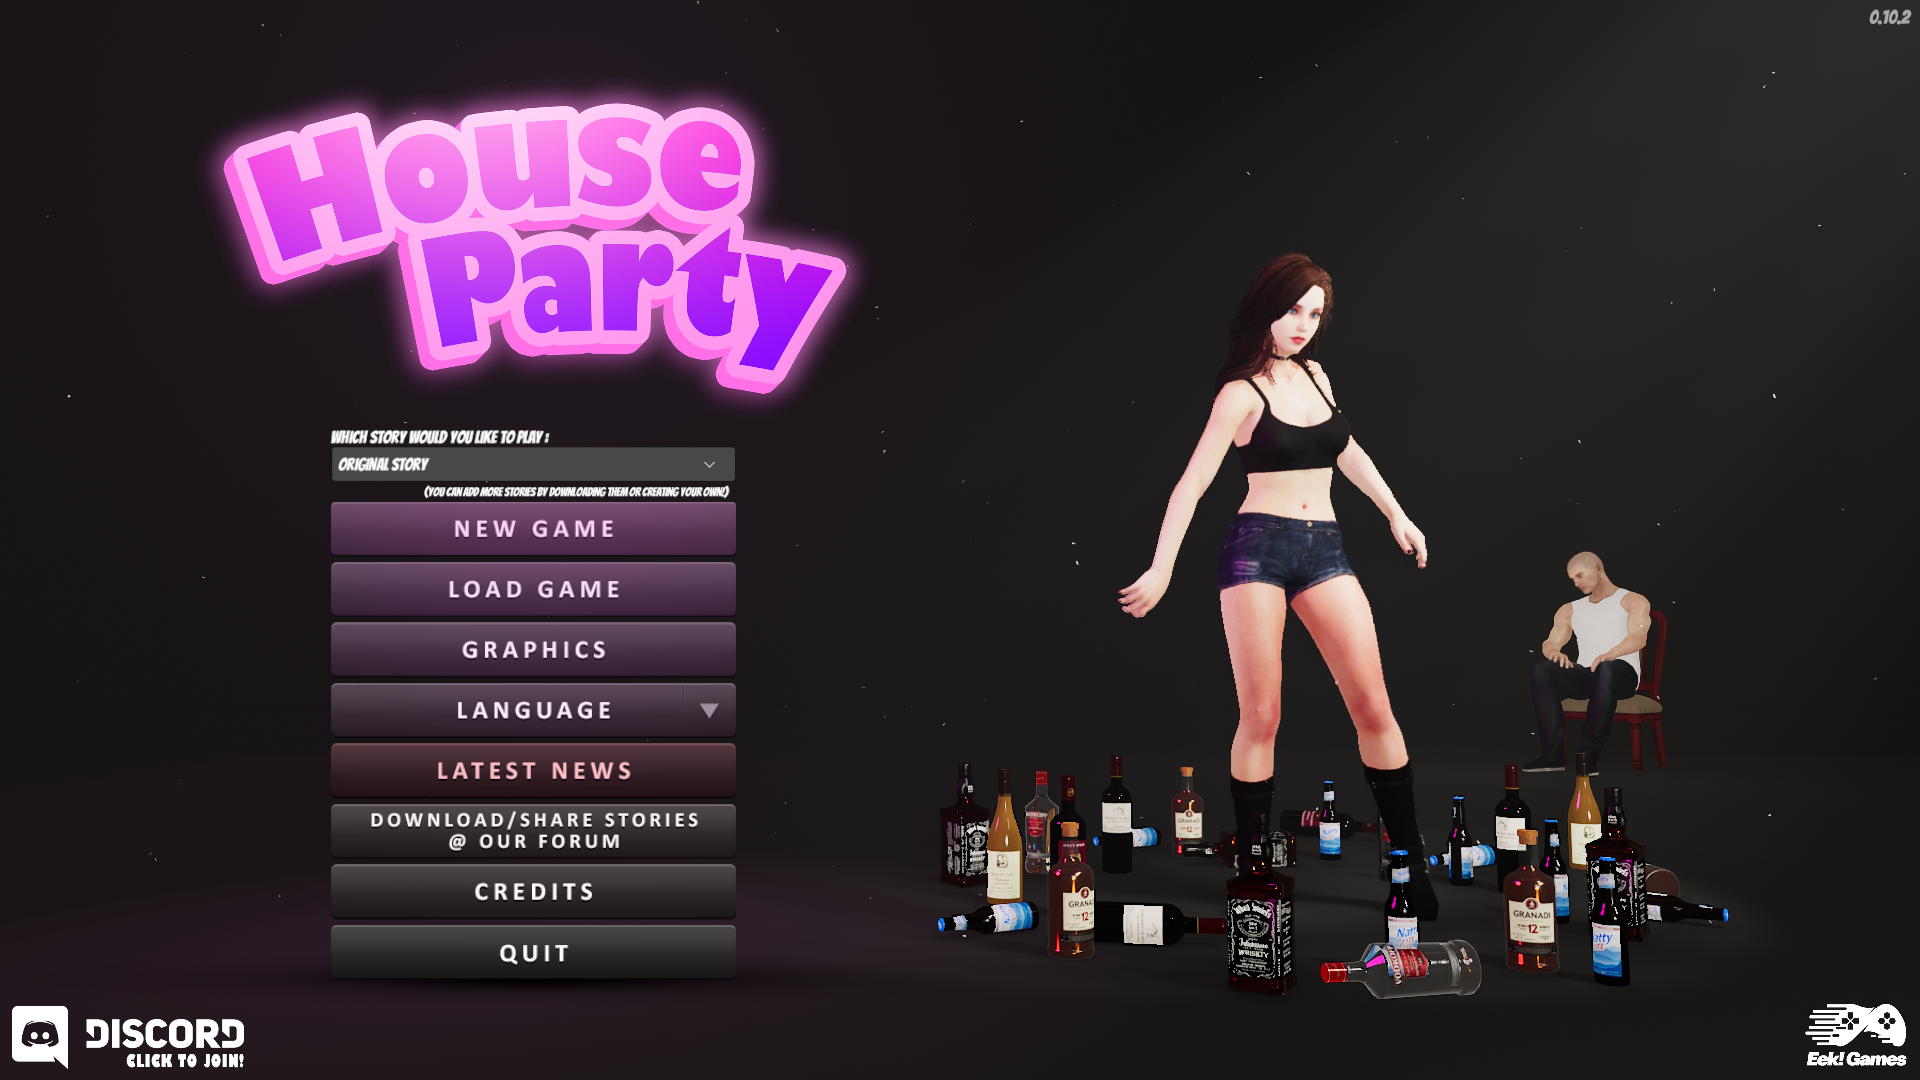 3d Project Sex House - Adultgamesworld: Free Porn Games & Sex Games Â» House Party â€“ New Final  Version 1.3.1.12017v (Full Game) [Eek! Games]